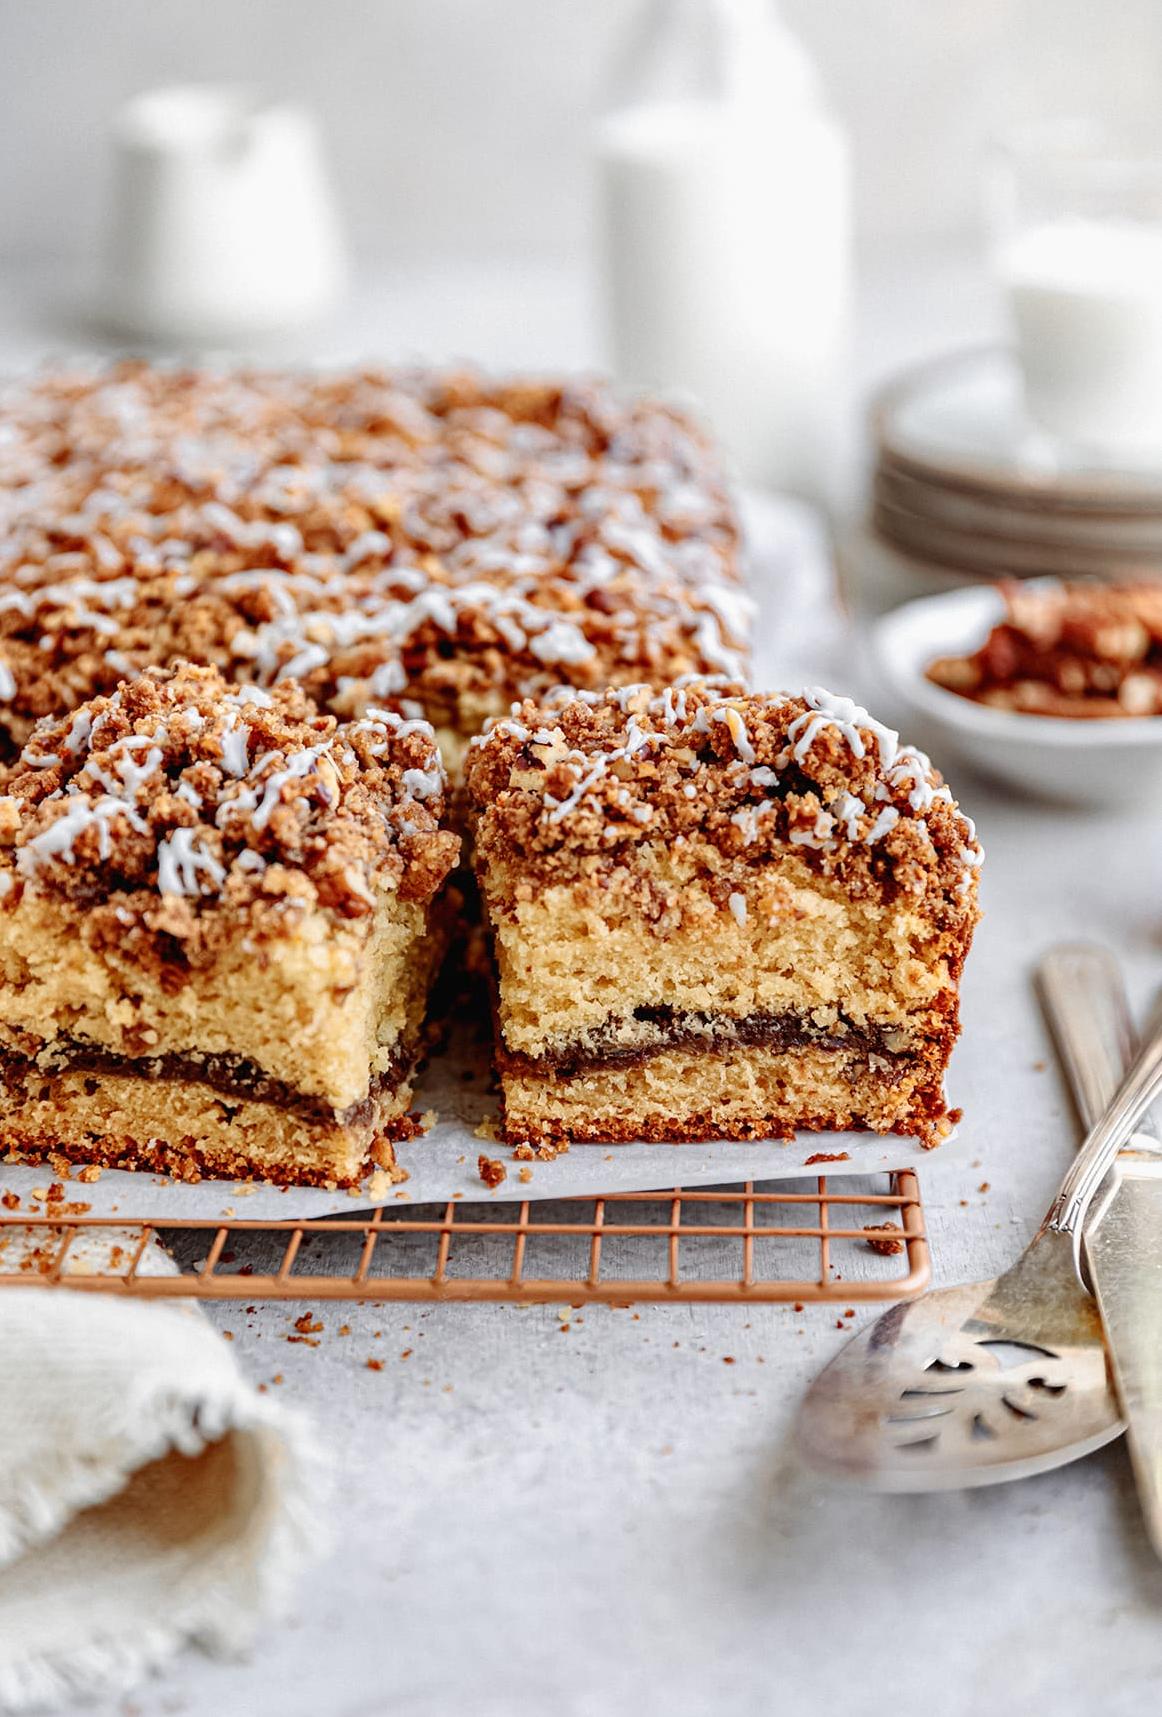  This cake is loaded with maple goodness, it's almost too good to be true.